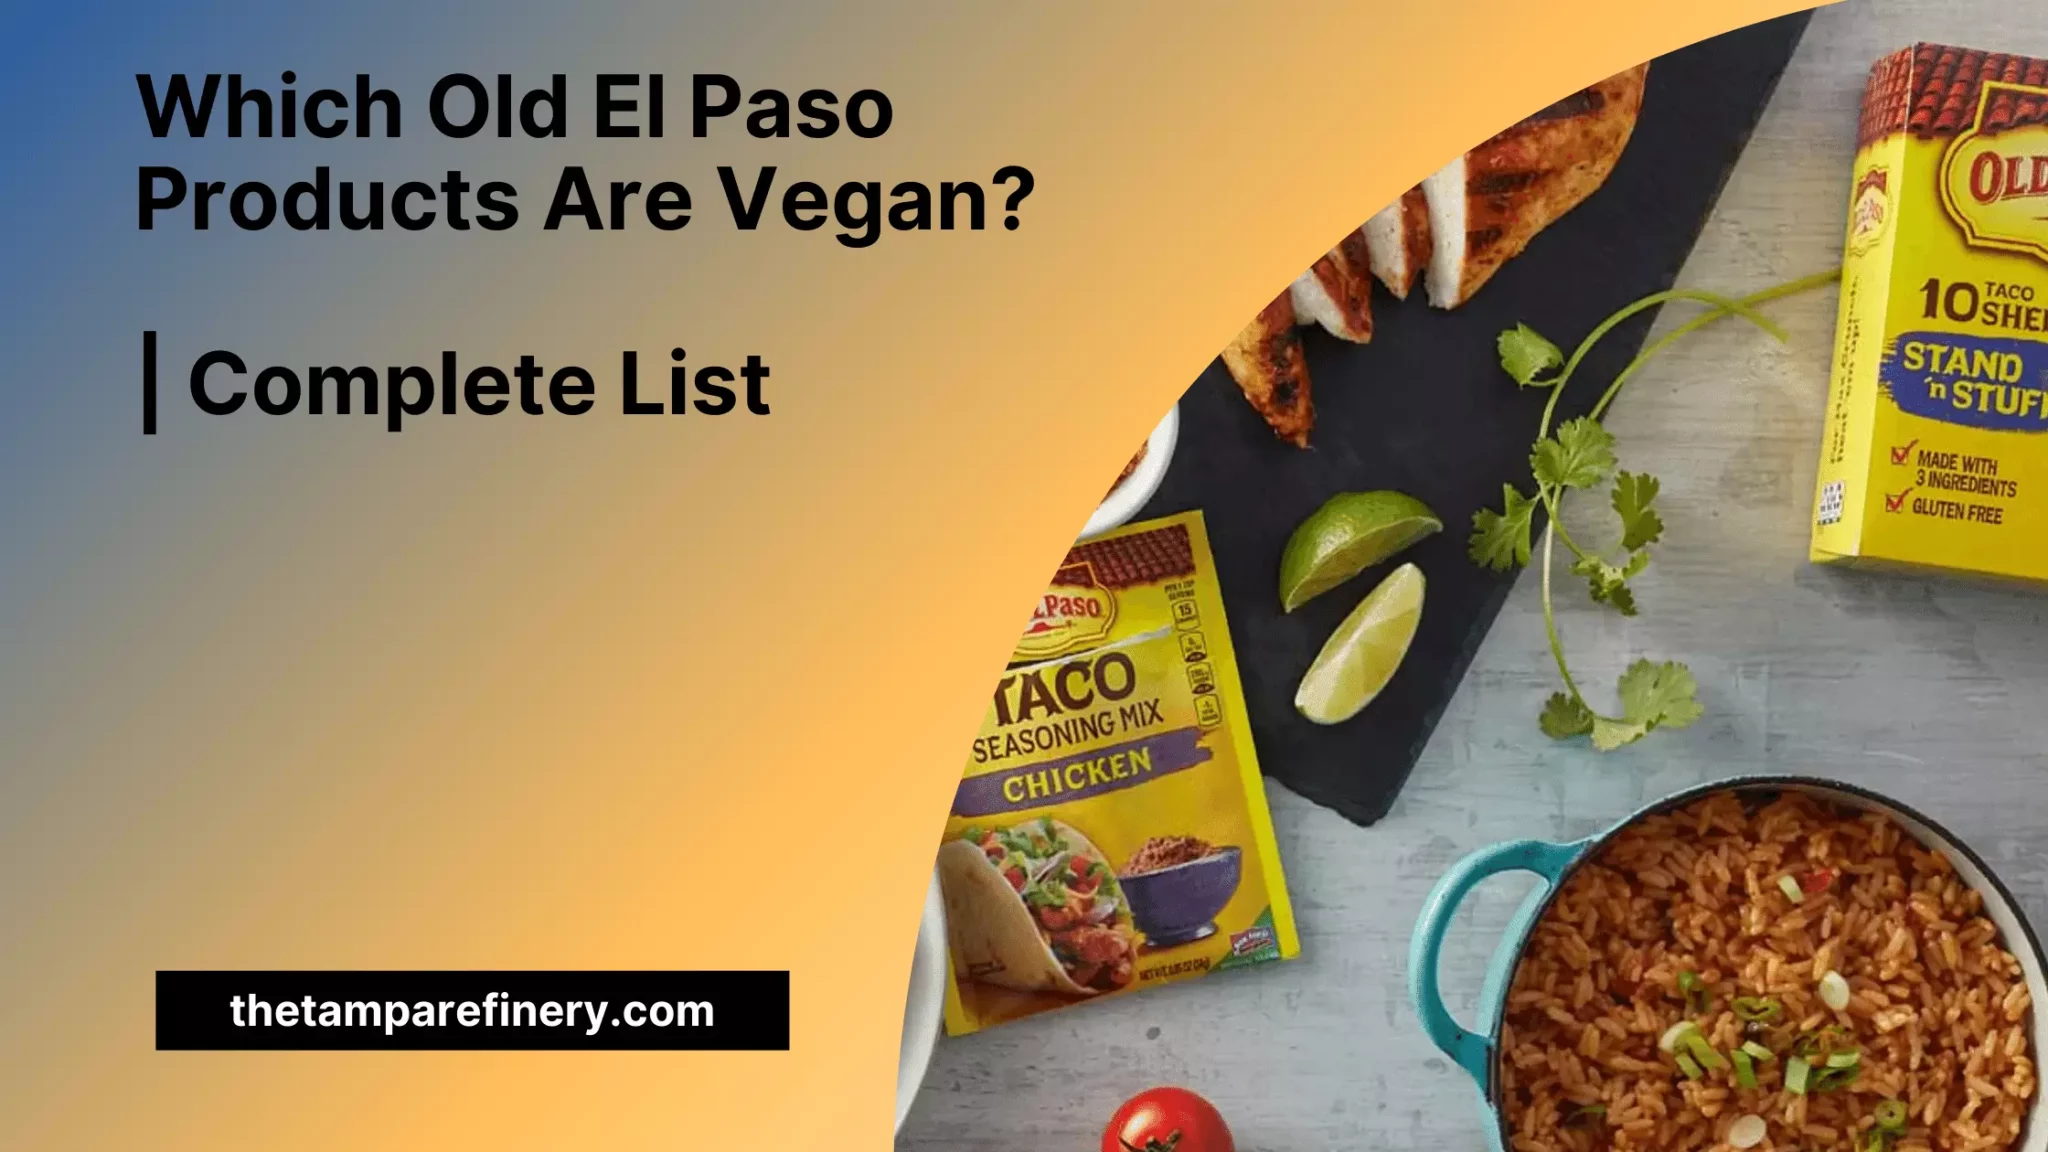 Which Old El Paso Products Are Vegan